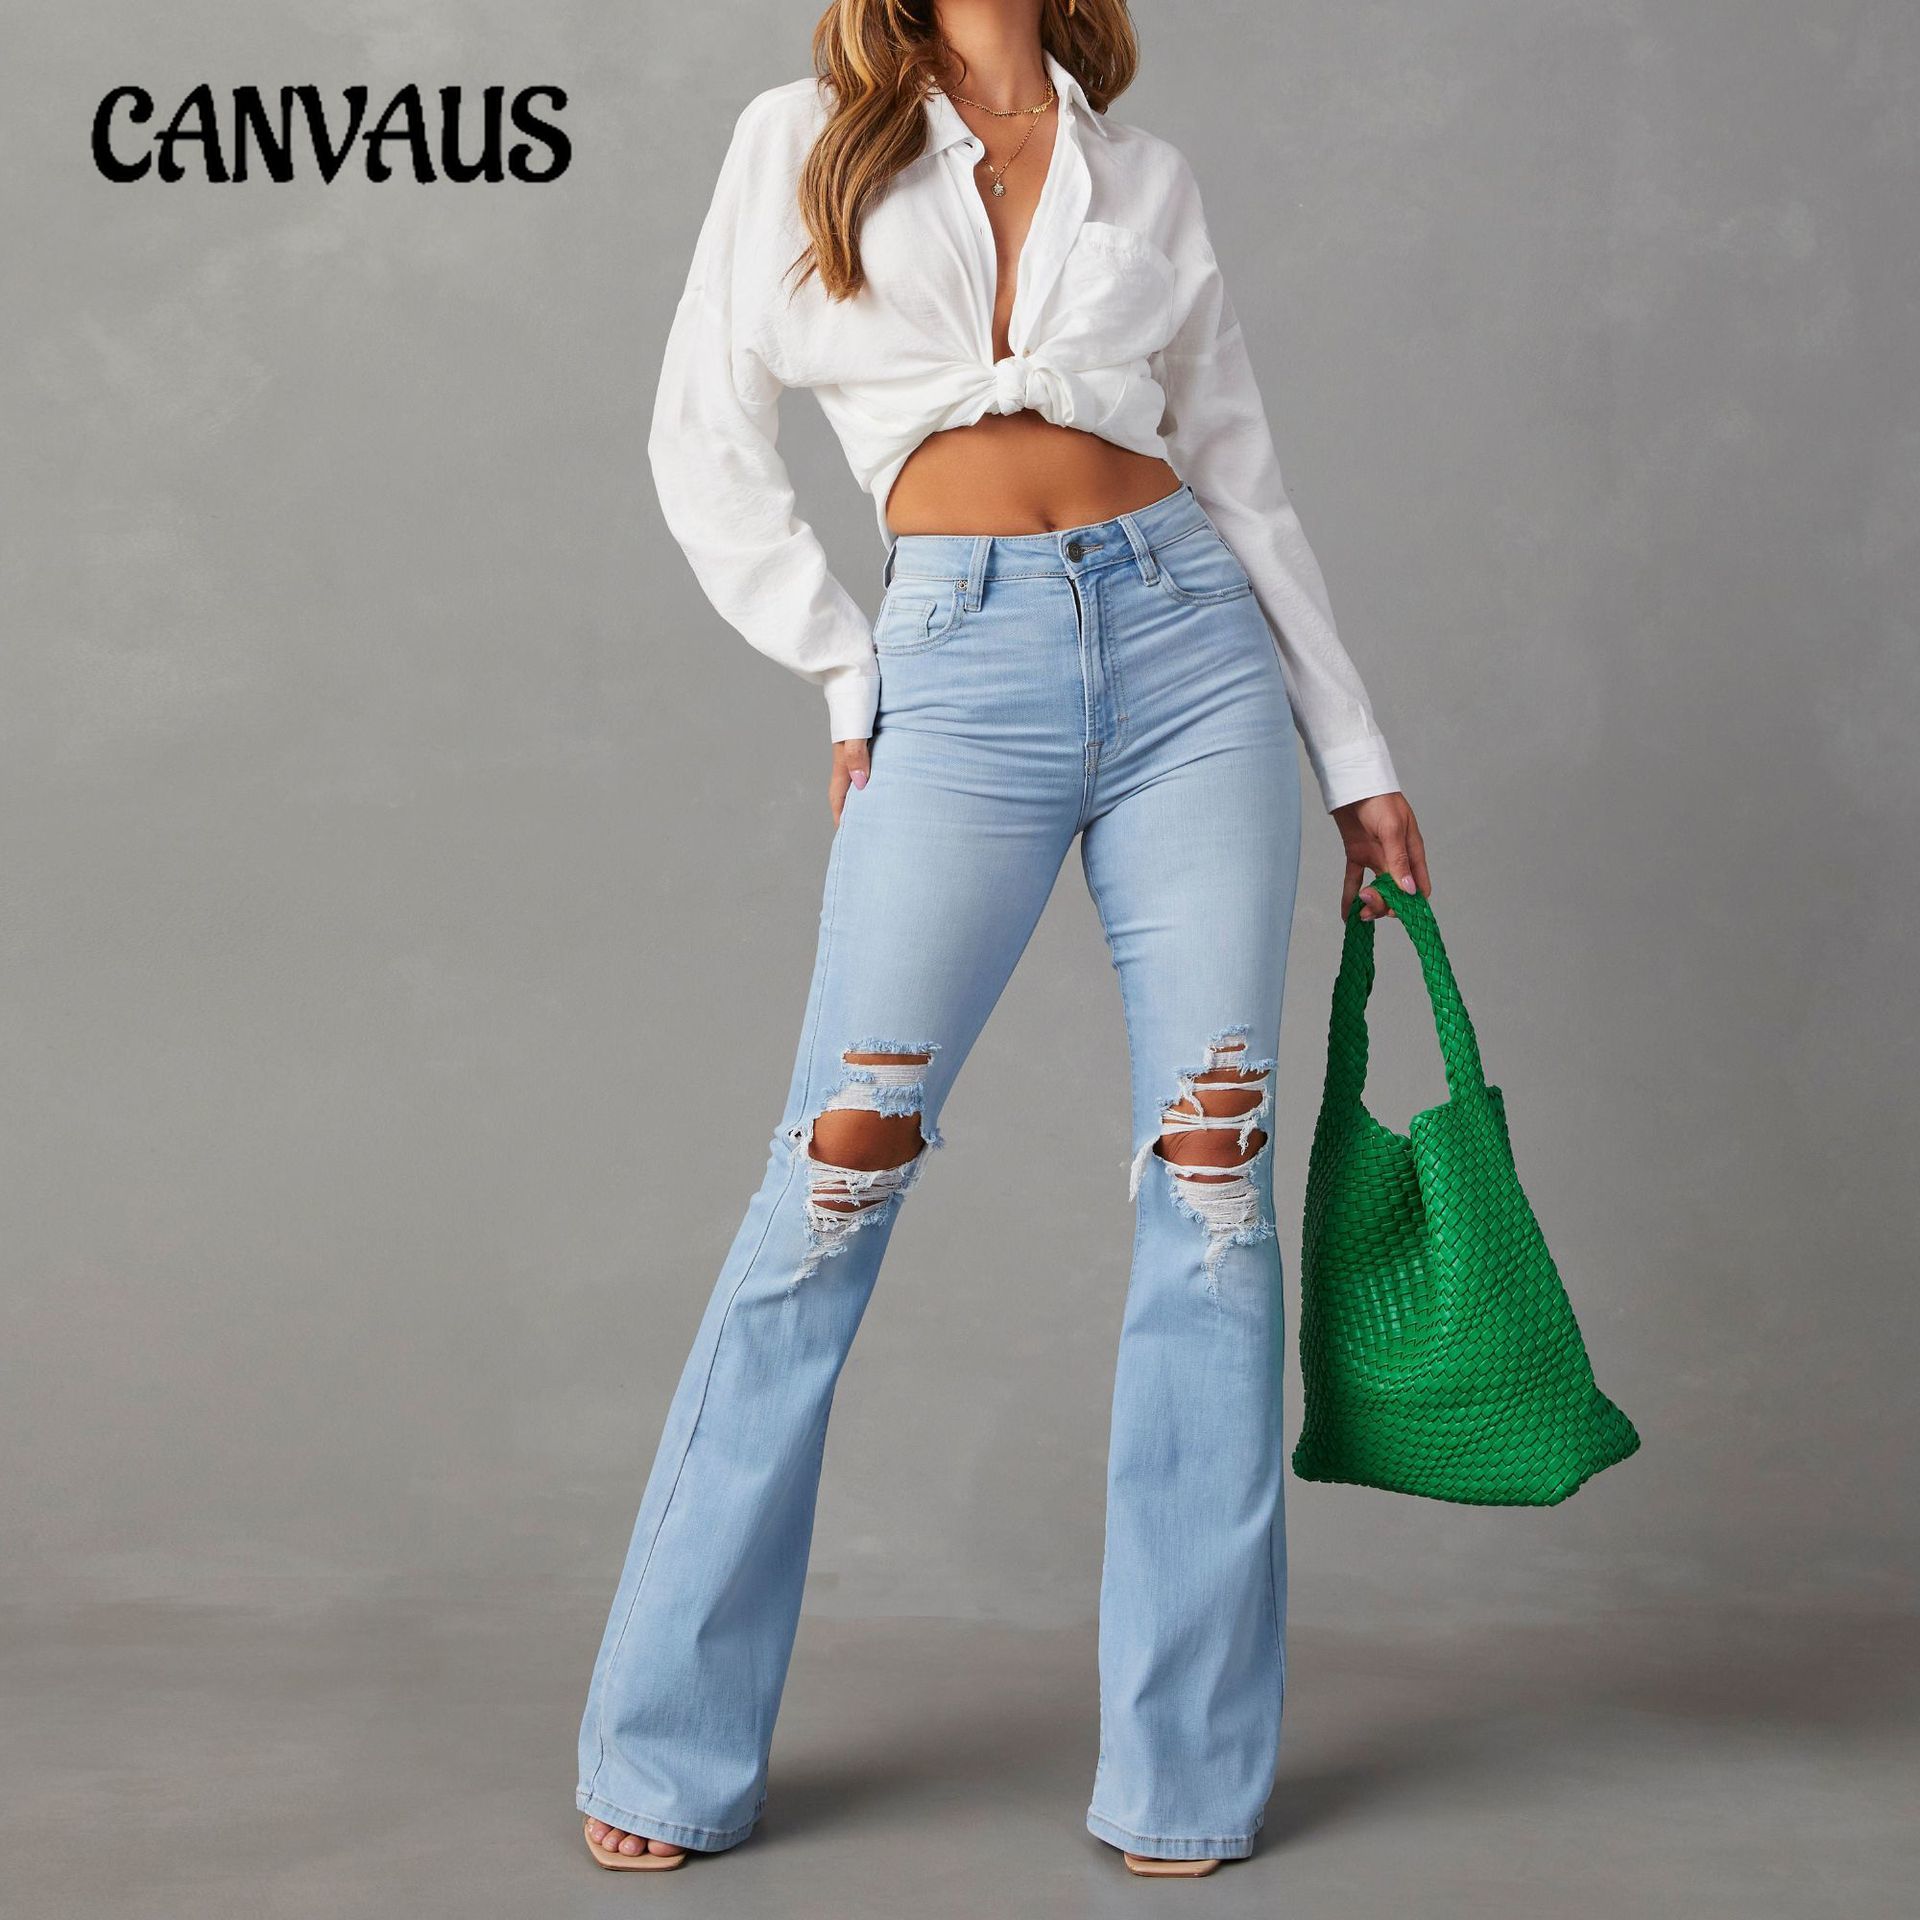 CANVAUS Spring Summer Women's Jeans High Waisted Hole Street Spice Flared Trousers Long Pants